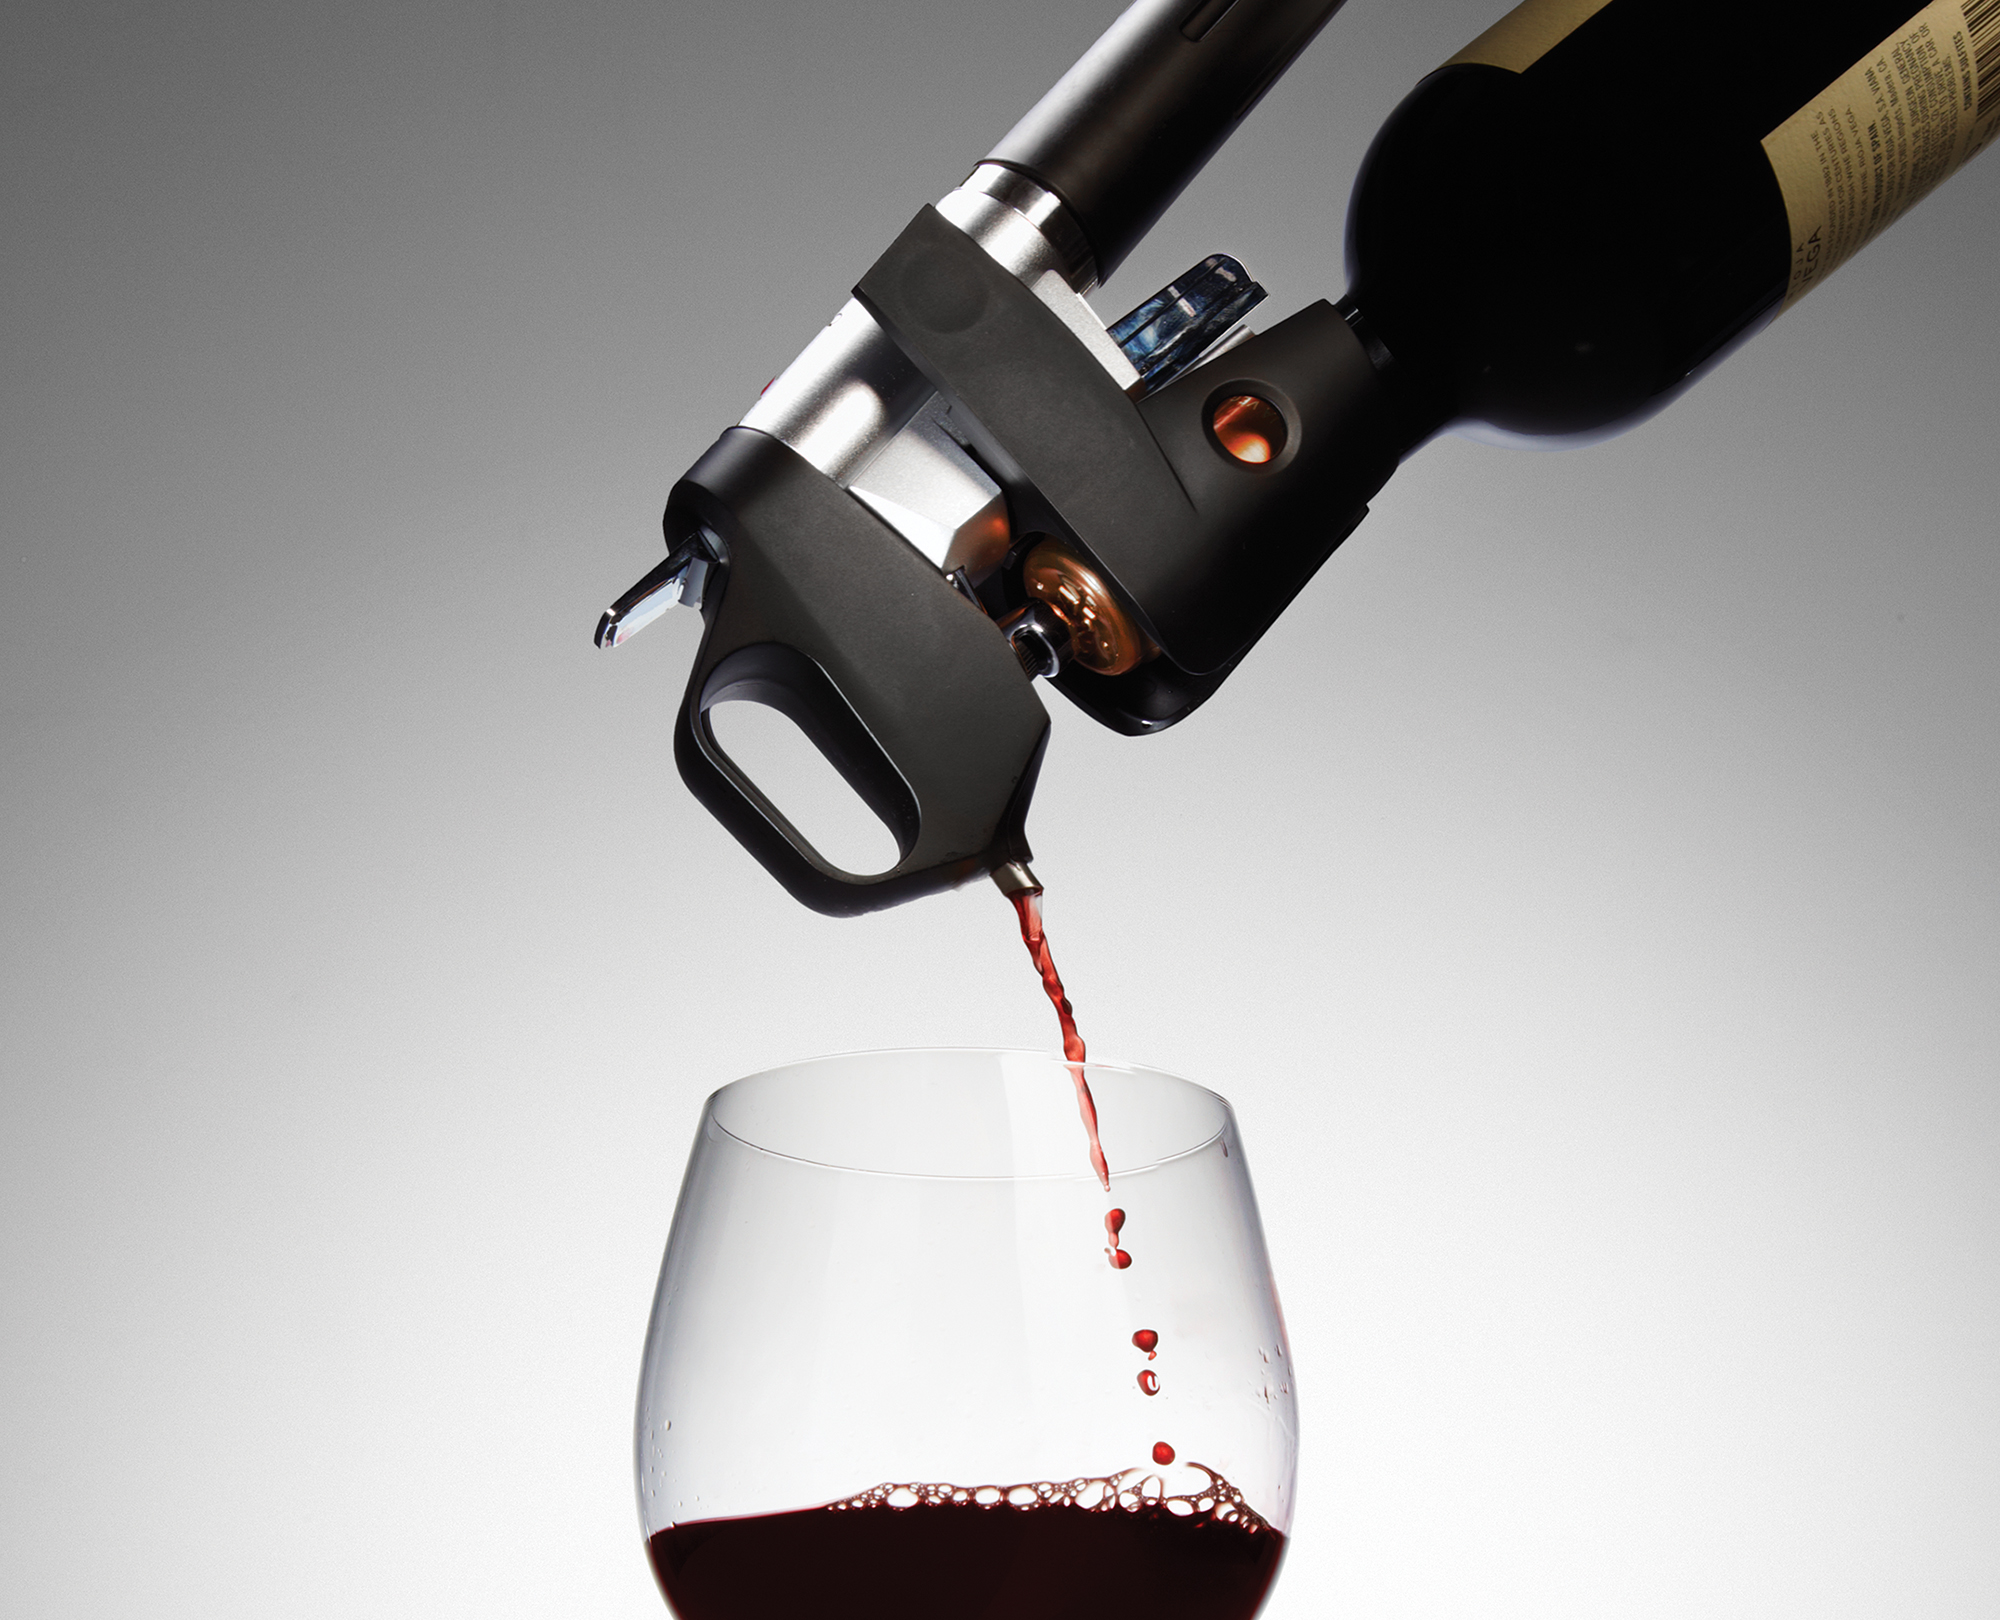 Surgical Needle That Sucks Wine From Bottle Without Removing Cork